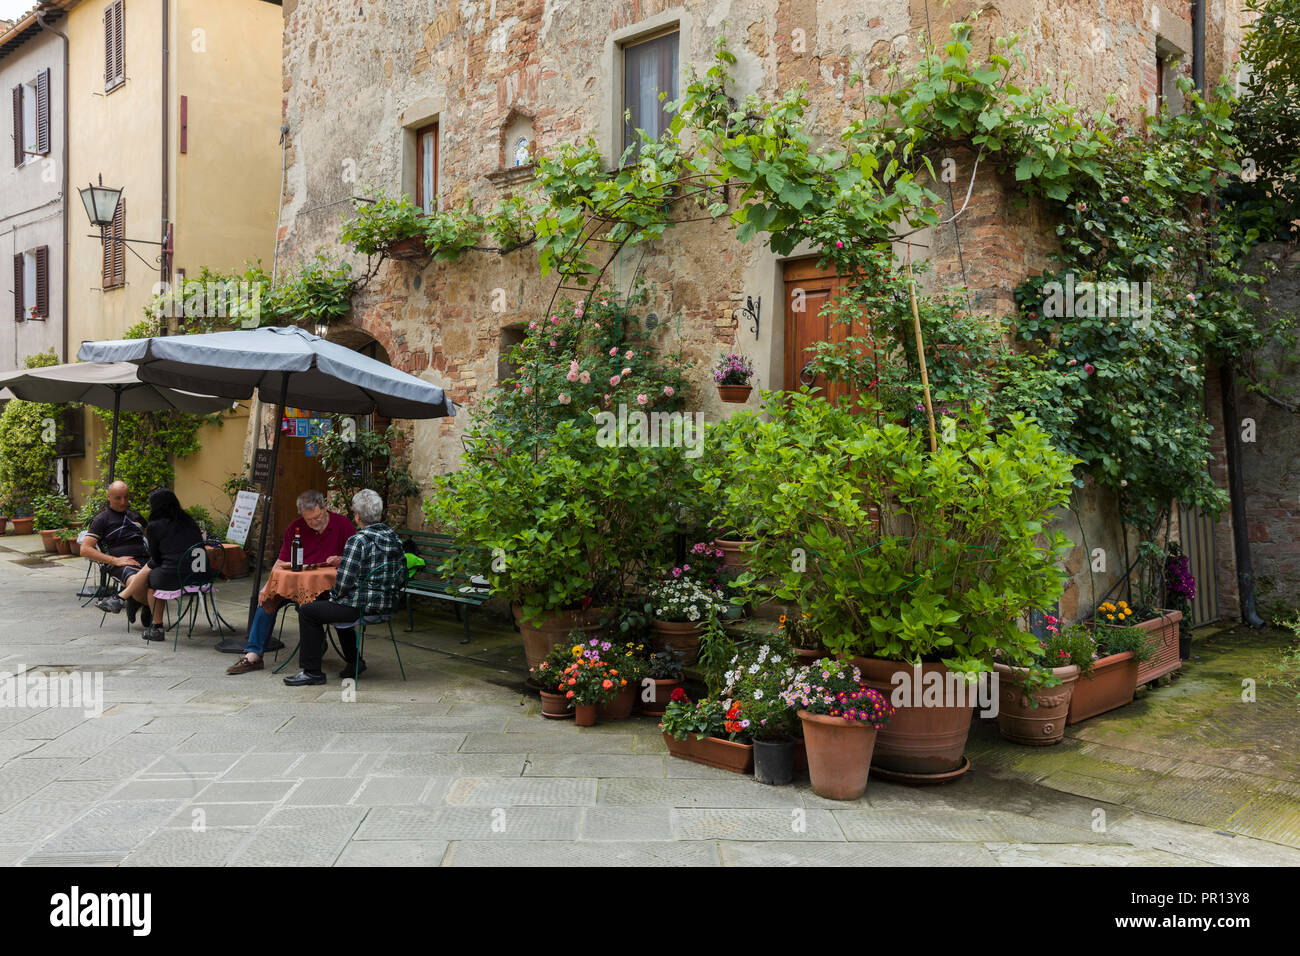 People sitting outside at a restaurant within a small courtyard surrounded by flowers in Pienza, Tuscany, Italy, Europe Stock Photo